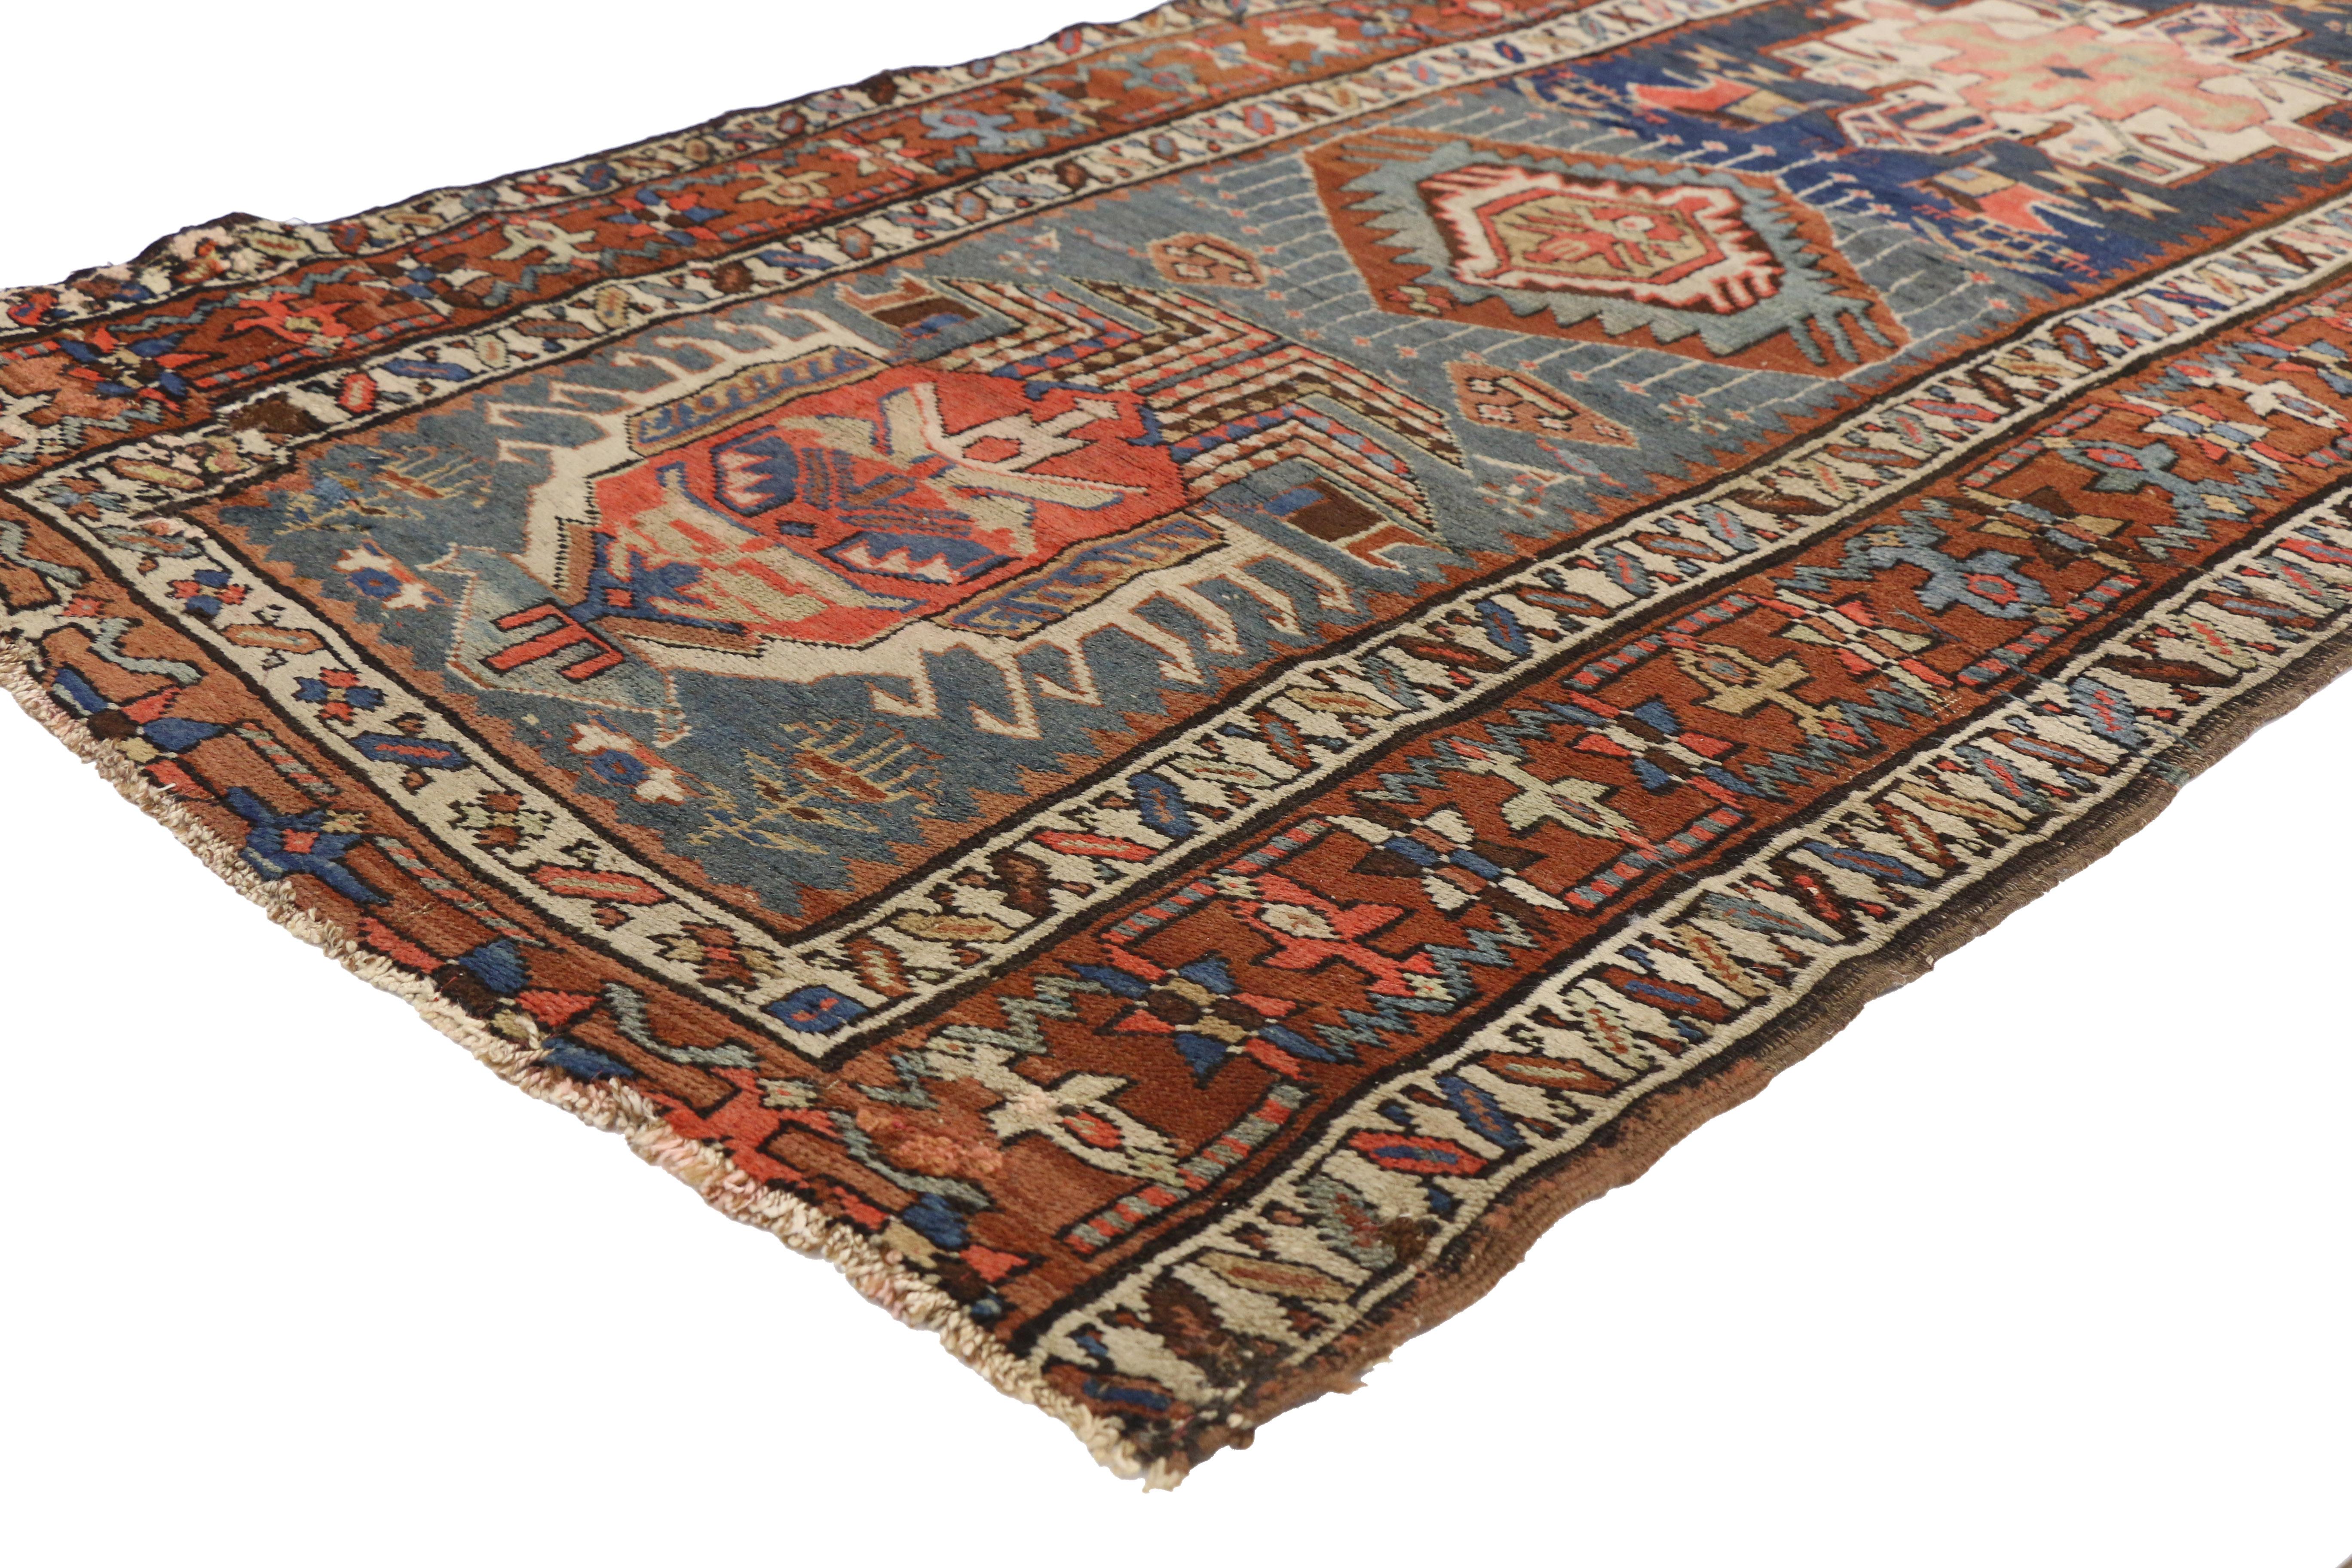 73247, antique Caucasian Kazak Tribal runner, hallway runner. The antique Caucasian runner communicates some of the finer and more important points of geometric design elements. Classically composed and displaying rich waves of abrash, this